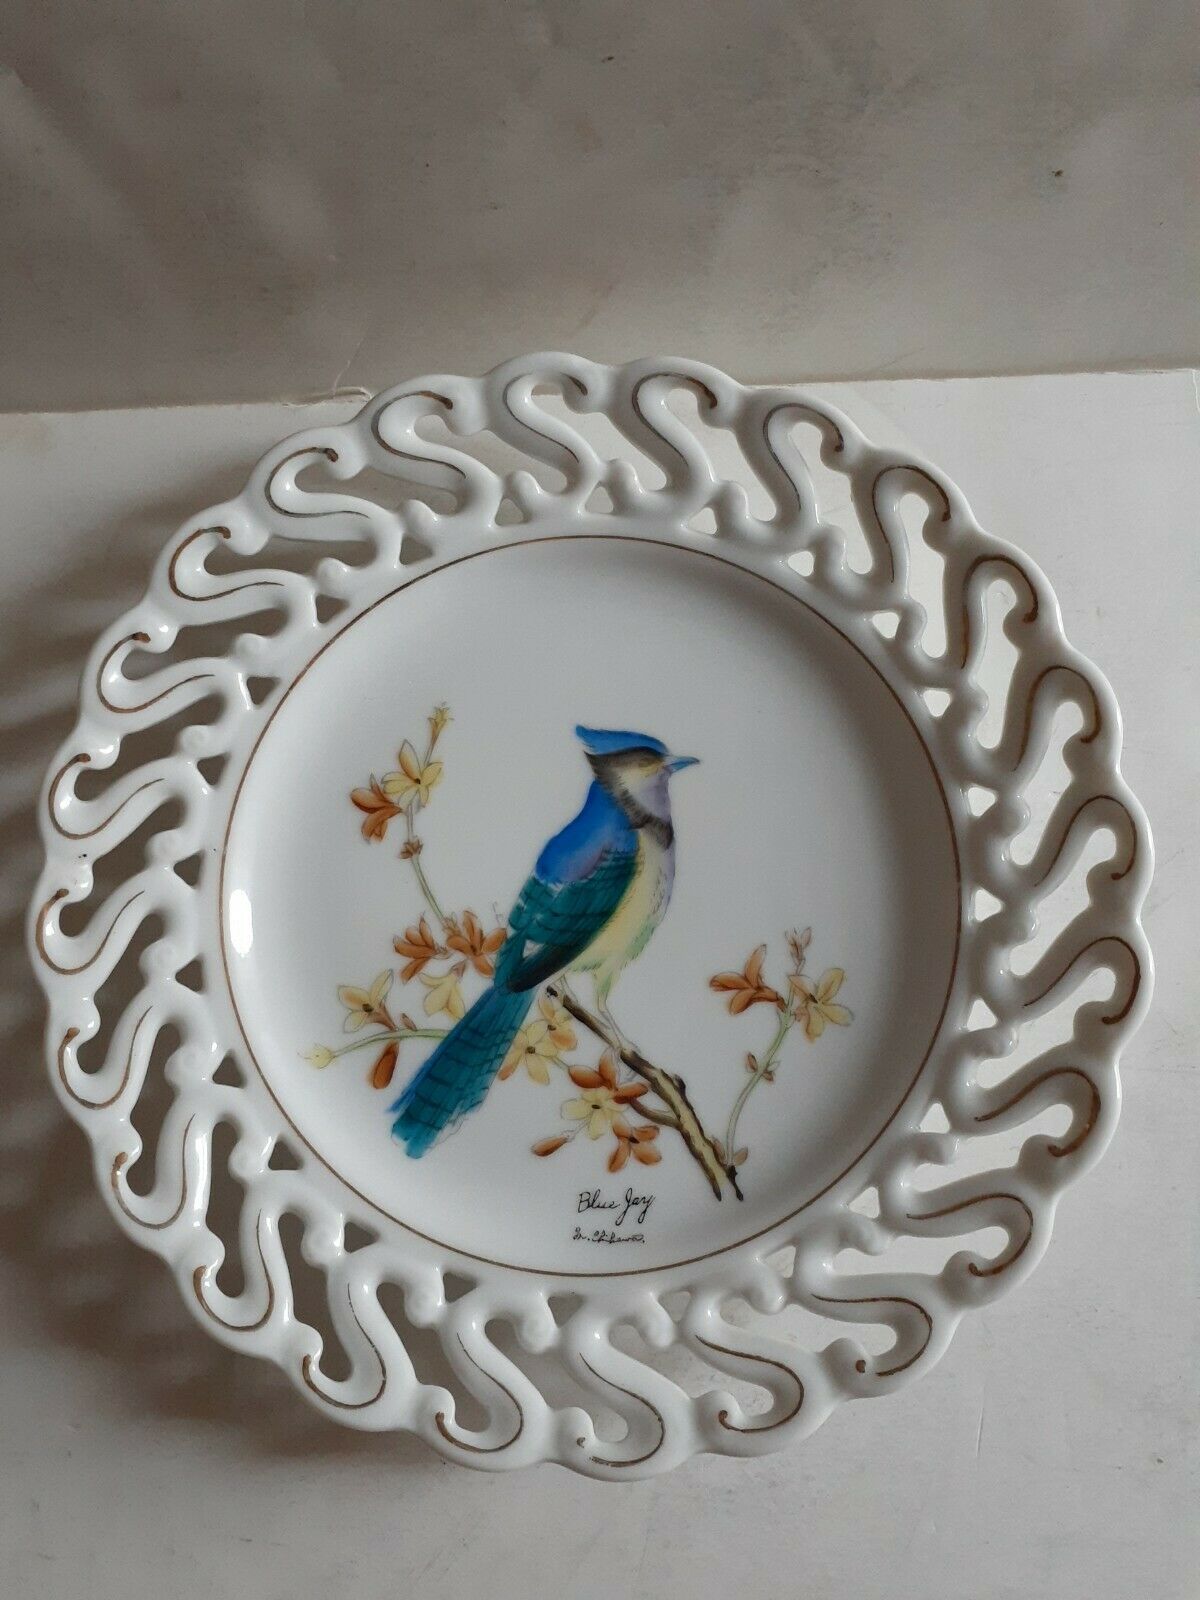 Napco China Vtg Collector Plate 8" Handpainted Signed Blue Jay S898 Lattice Edge